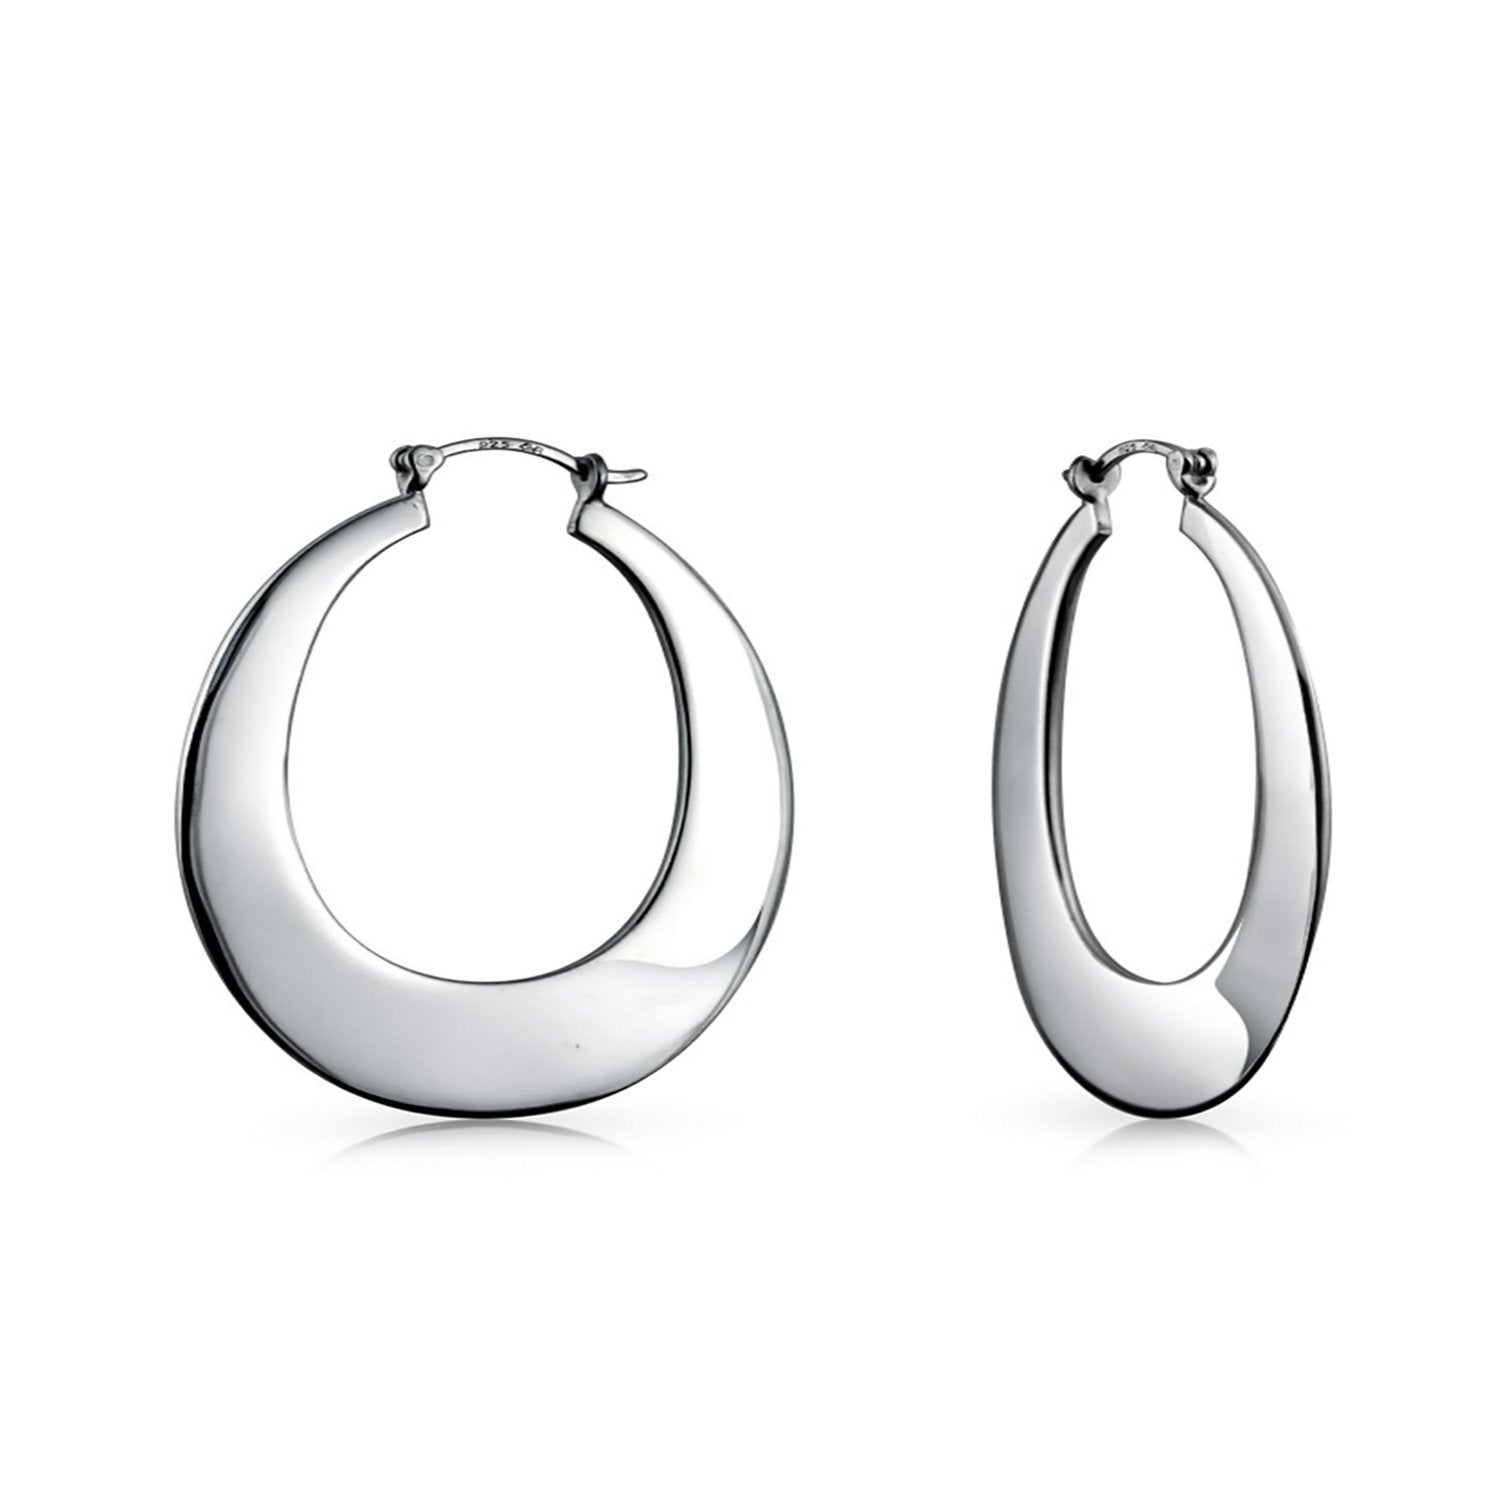 Engrave Flat Tapered Round Hoop Earrings 925 Sterling Silver 1.25 Inch - Joyeria Lady